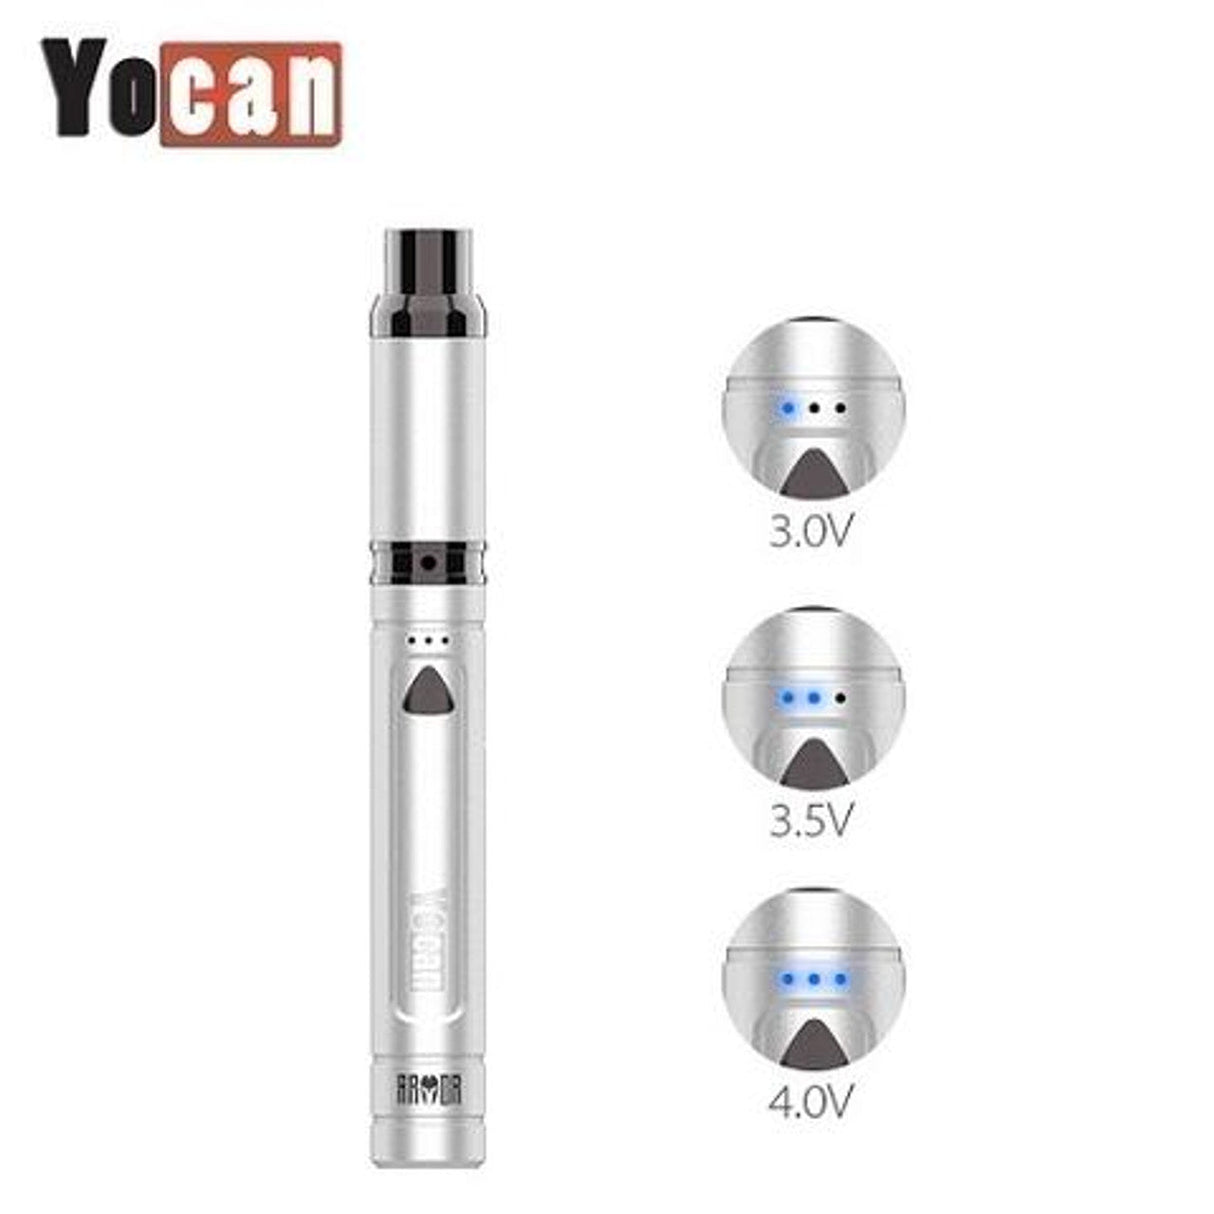 Yocan Armor Wax Vaporizer in Silver with Battery Voltage Indicators - Portable Dab Pen